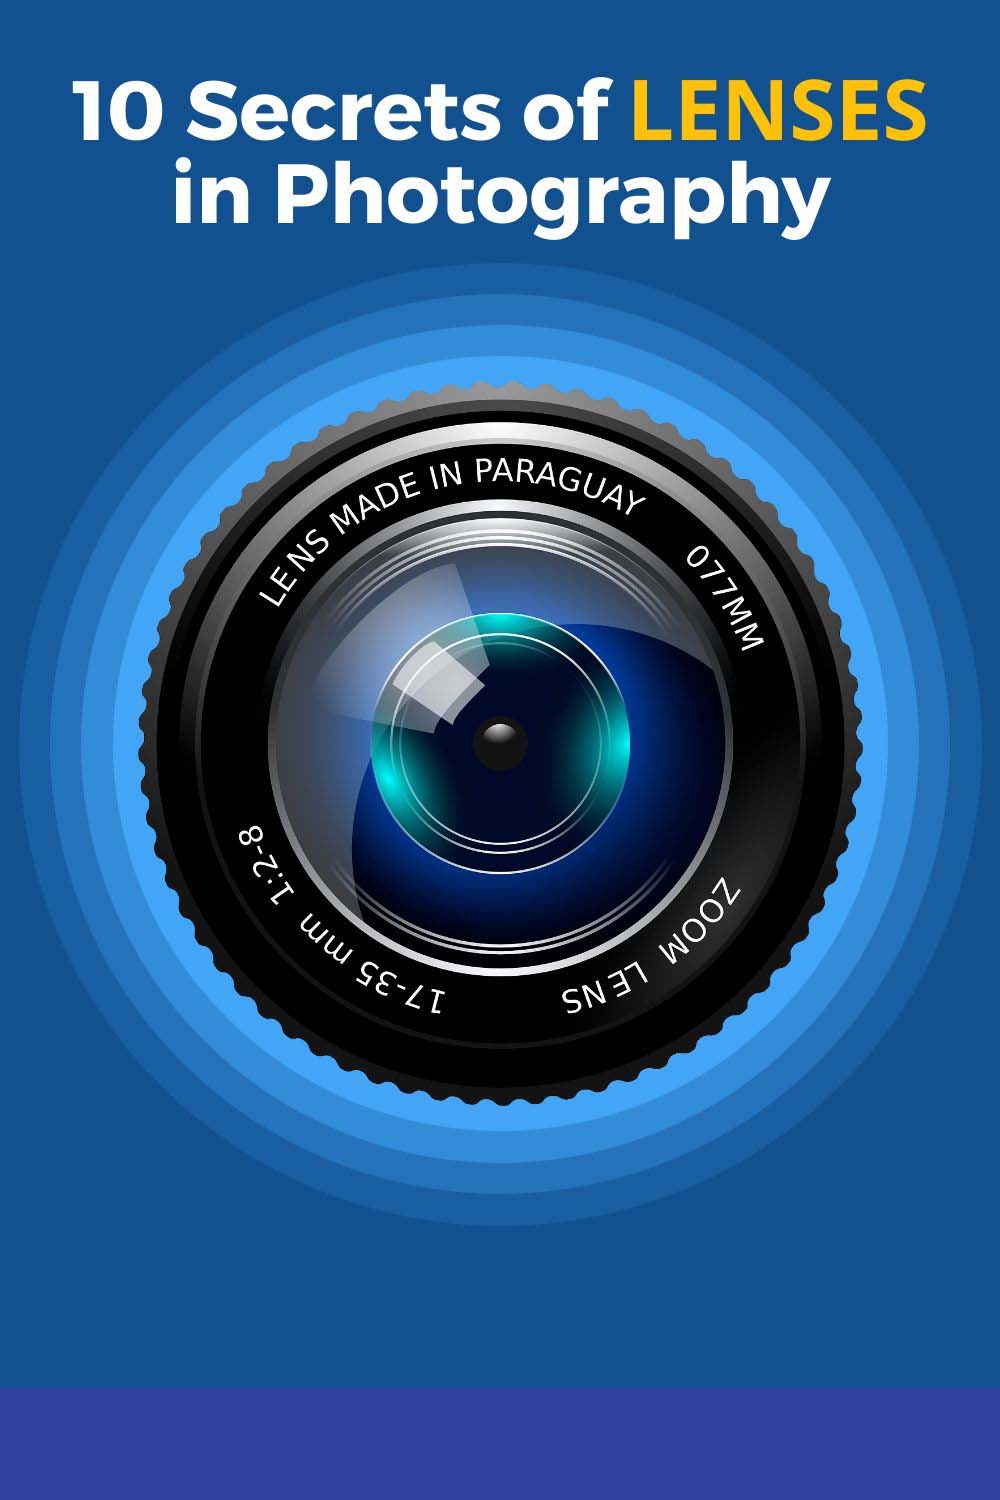 lenses in photography